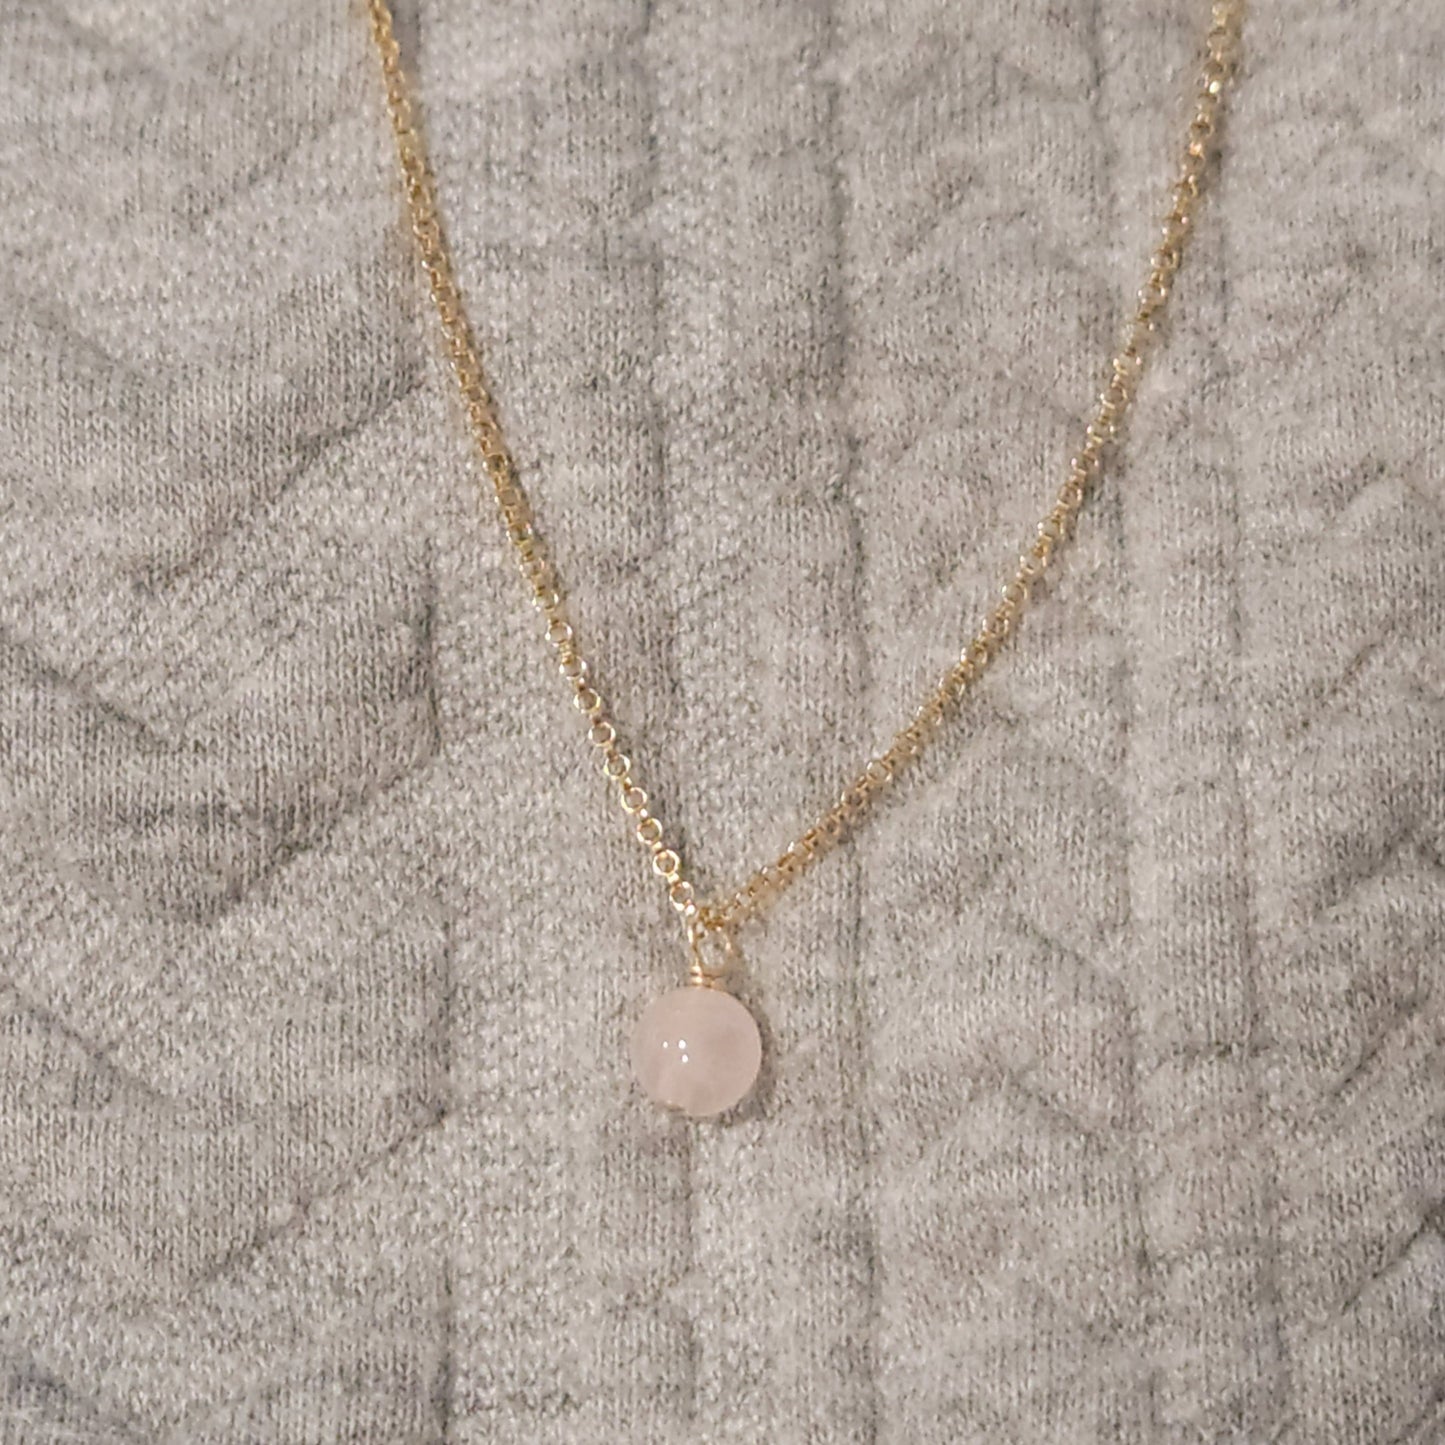 small 6mm rose quartz gemstone hanging from 14k gold filled rolo chain 